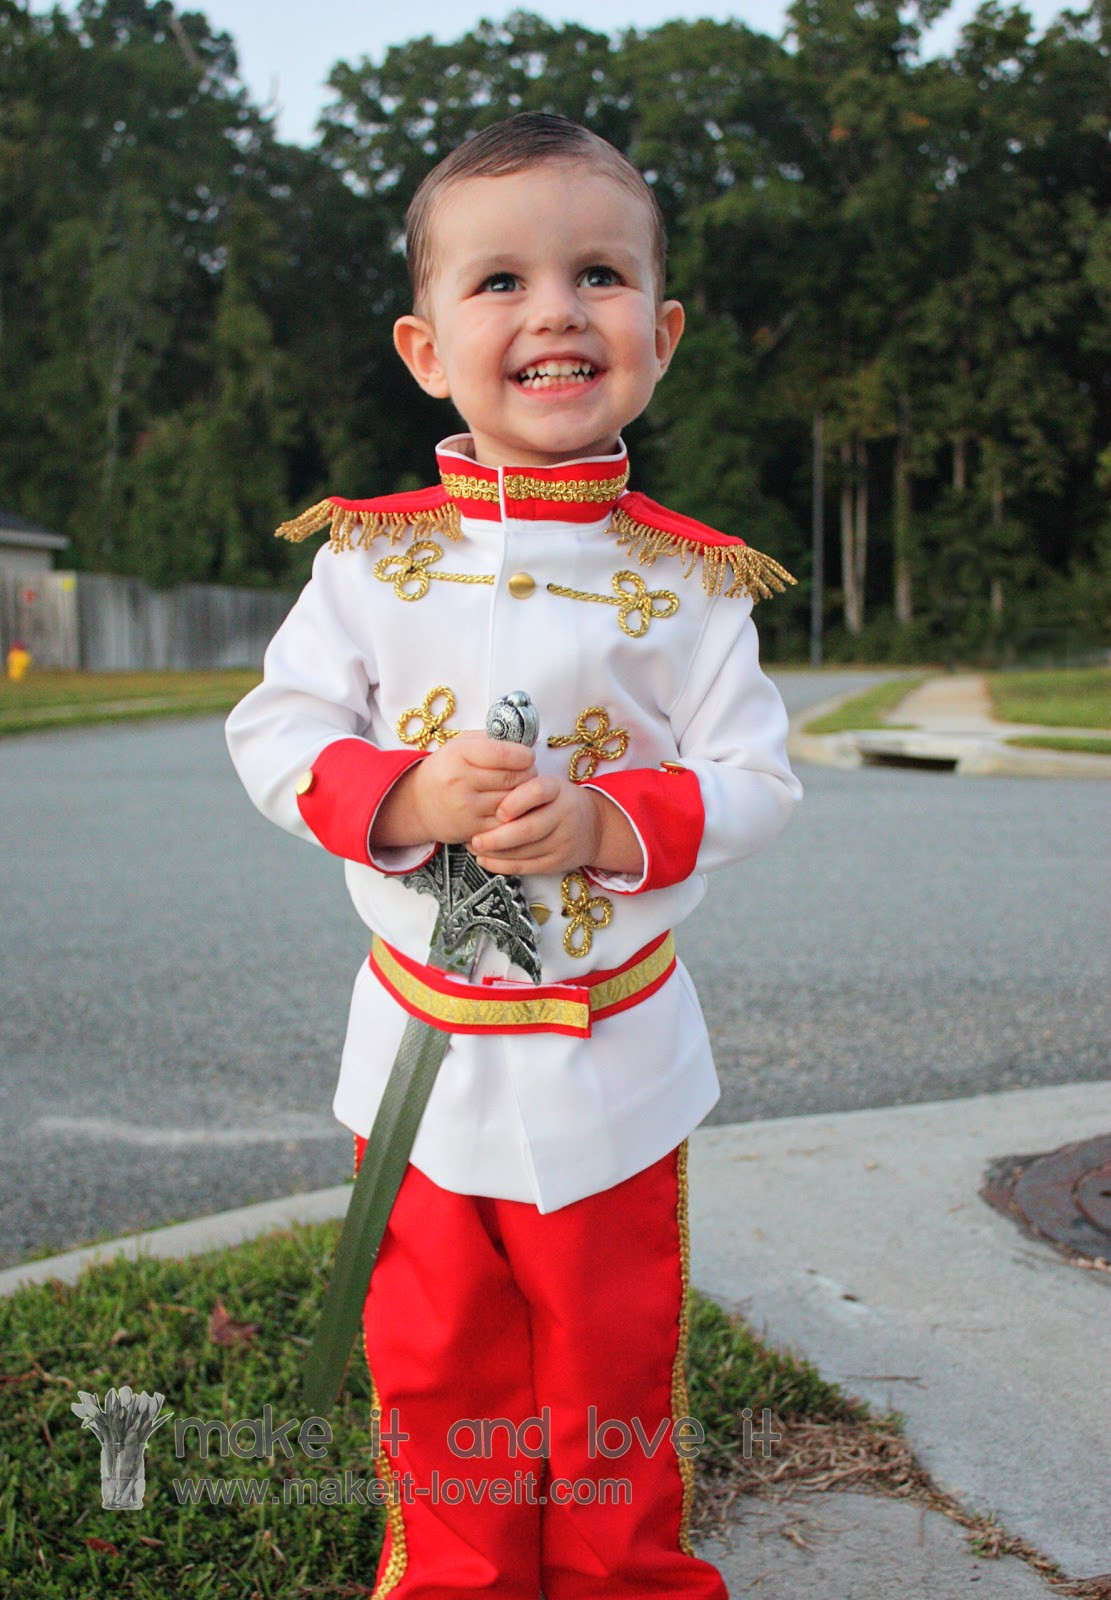 Toddler DIY Halloween Costumes
 Prince Charming Costume Tutorial from Cinderella